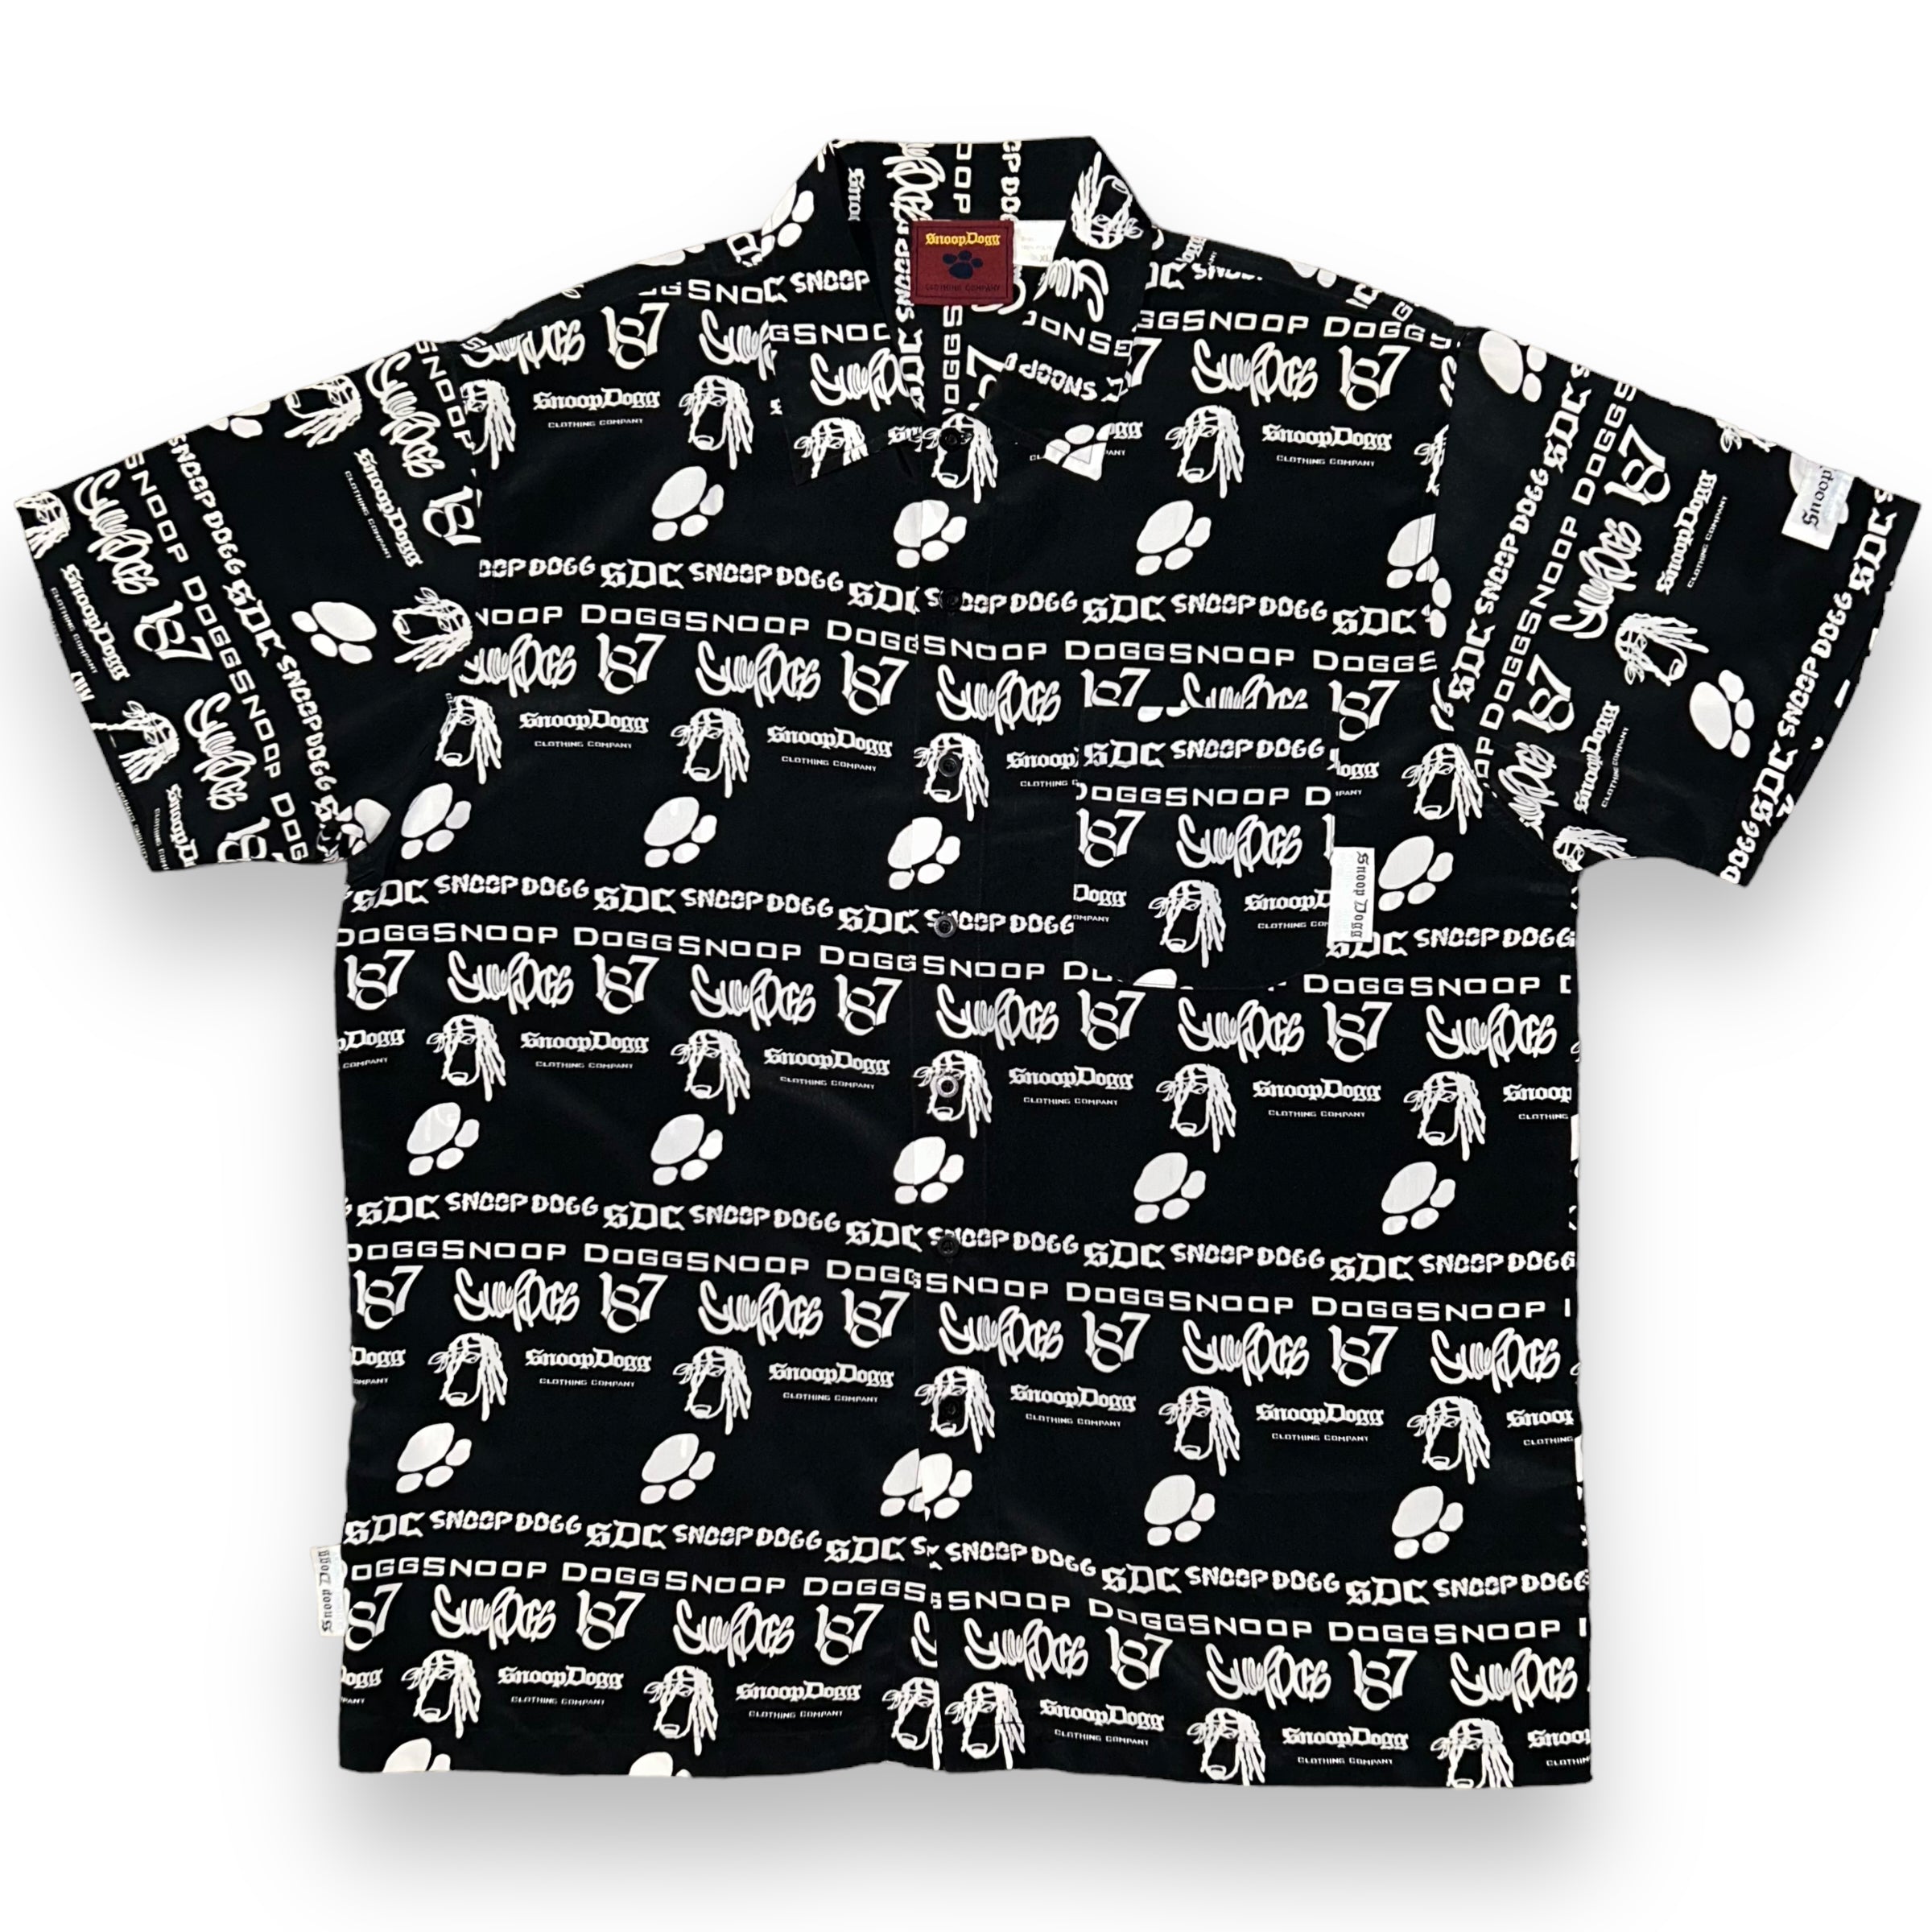 Camicia Snoop Dogg Clothing (XL/XXL) - oldstyleclothing